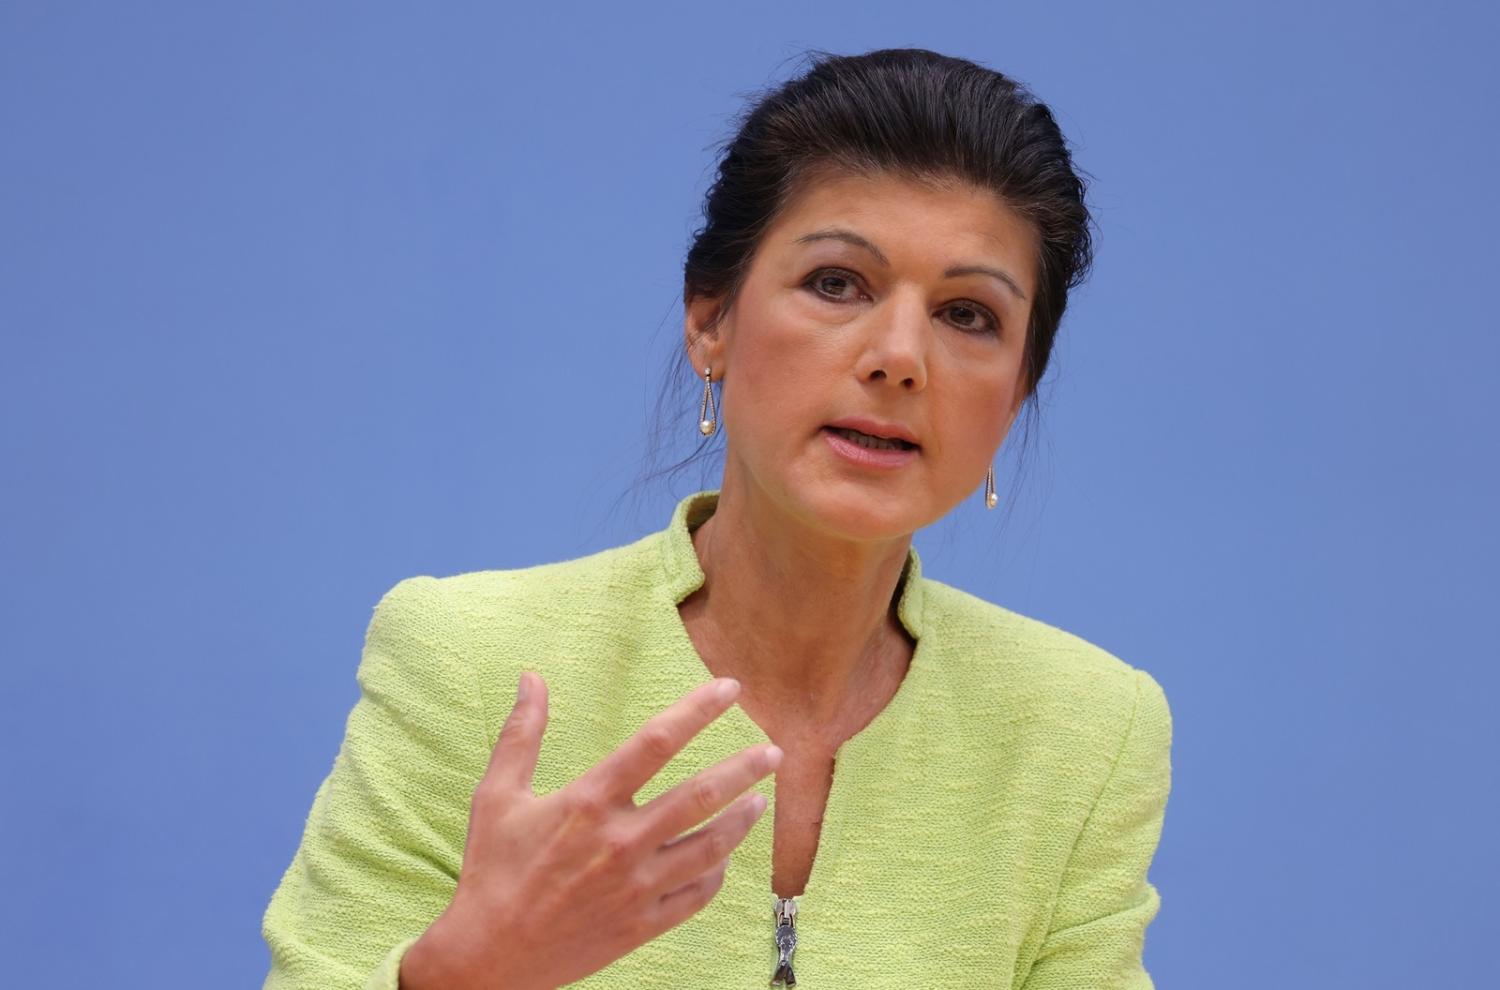 Sahra Wagenknecht presents her BSW ("Buendnis Sahra Wagenknecht") political alliance to the media on 23 October 2023 in Berlin, Germany (Sean Gallup/Getty Images)